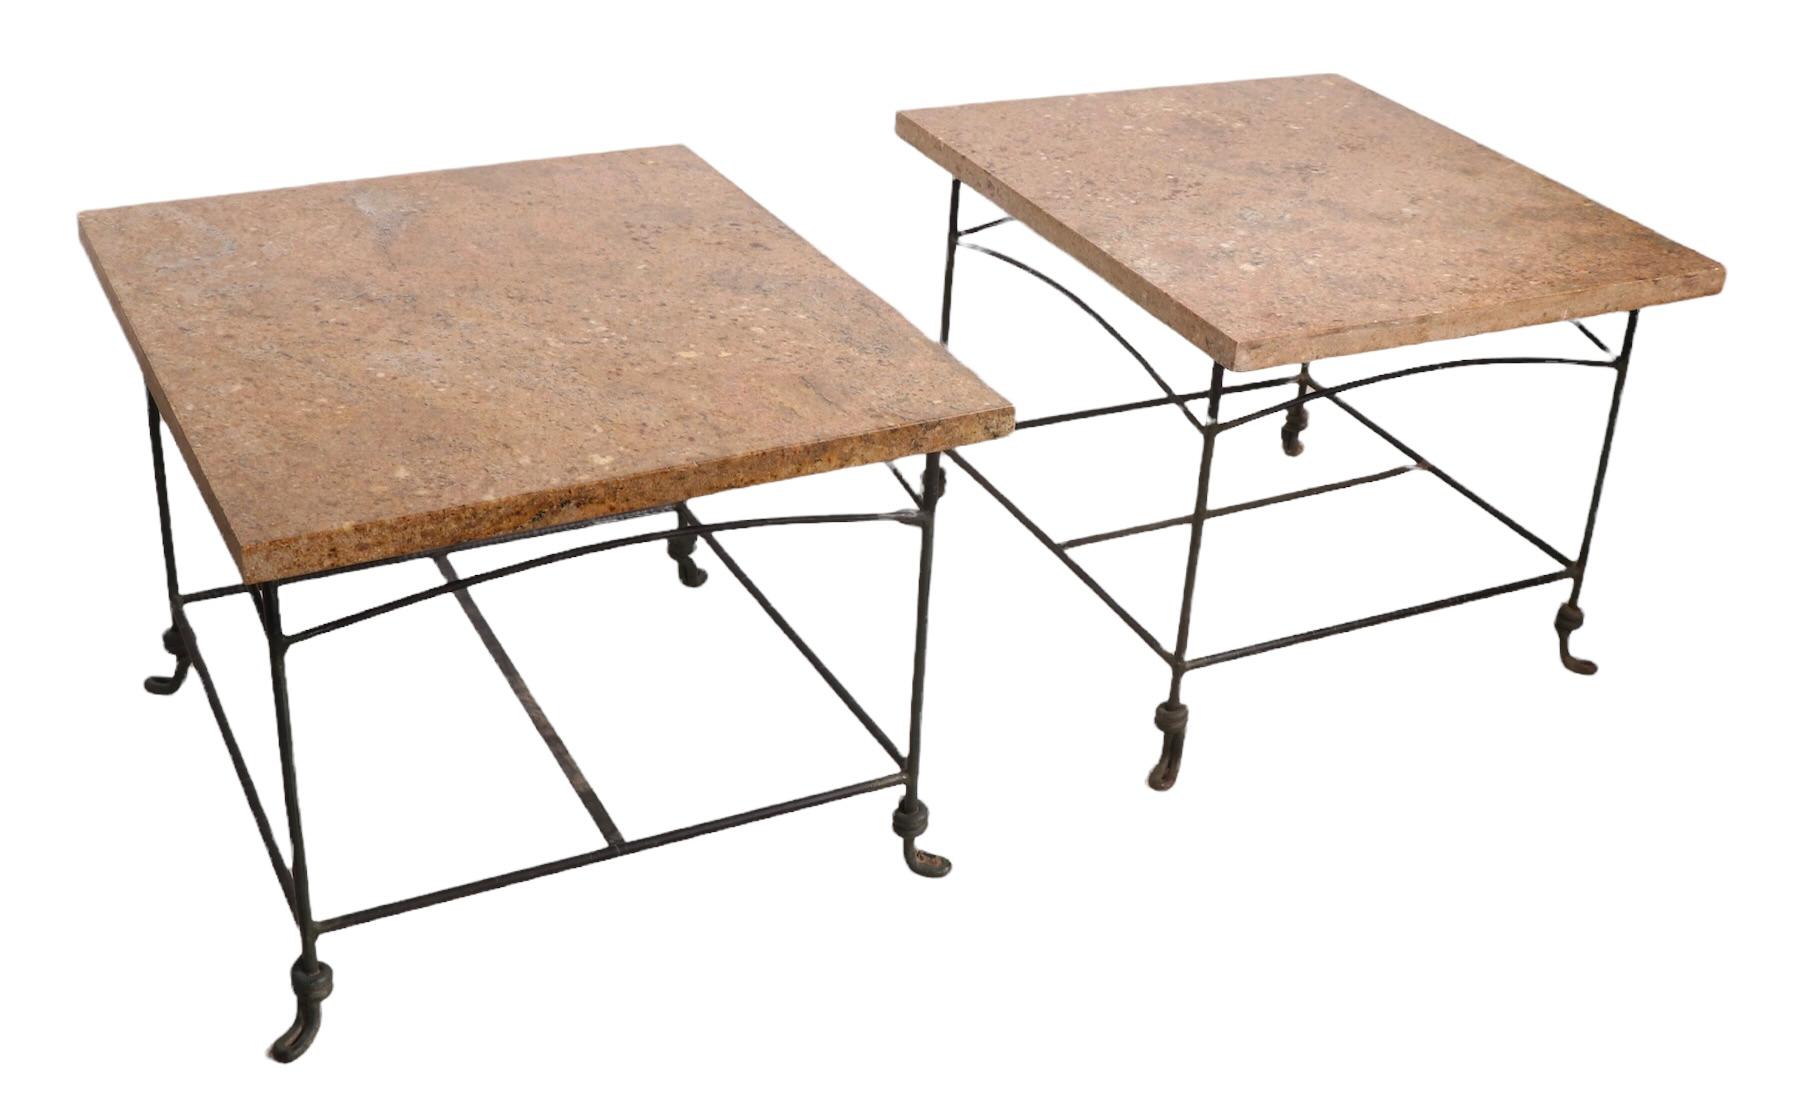 Pr. Wrought Iron Garden Patio End Tables with Polished Granite Tops 5